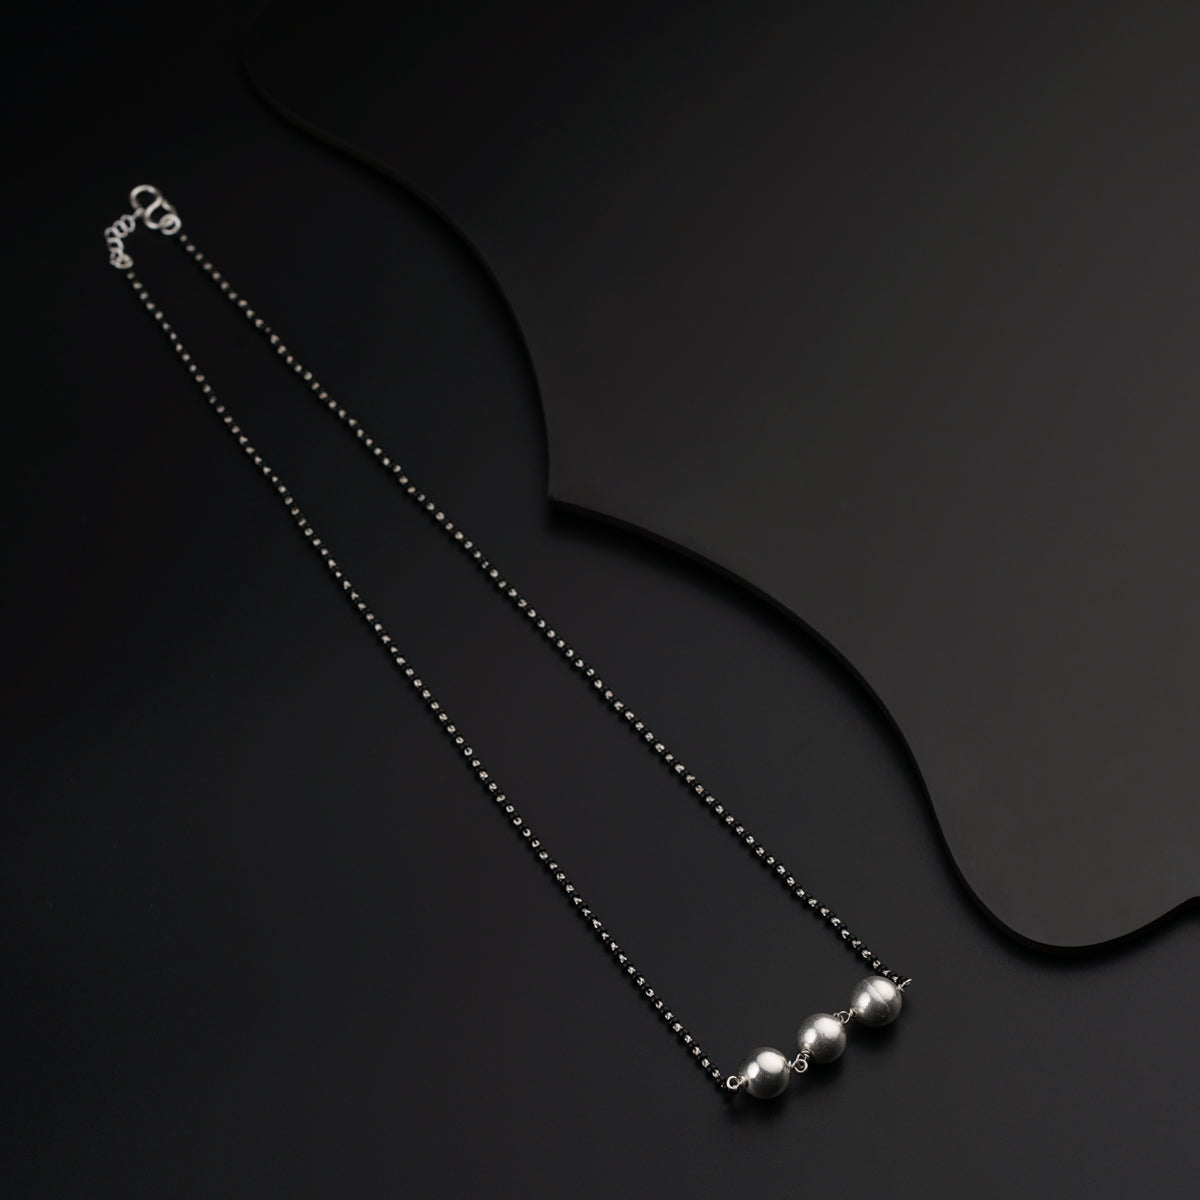 a pair of necklaces on a black surface